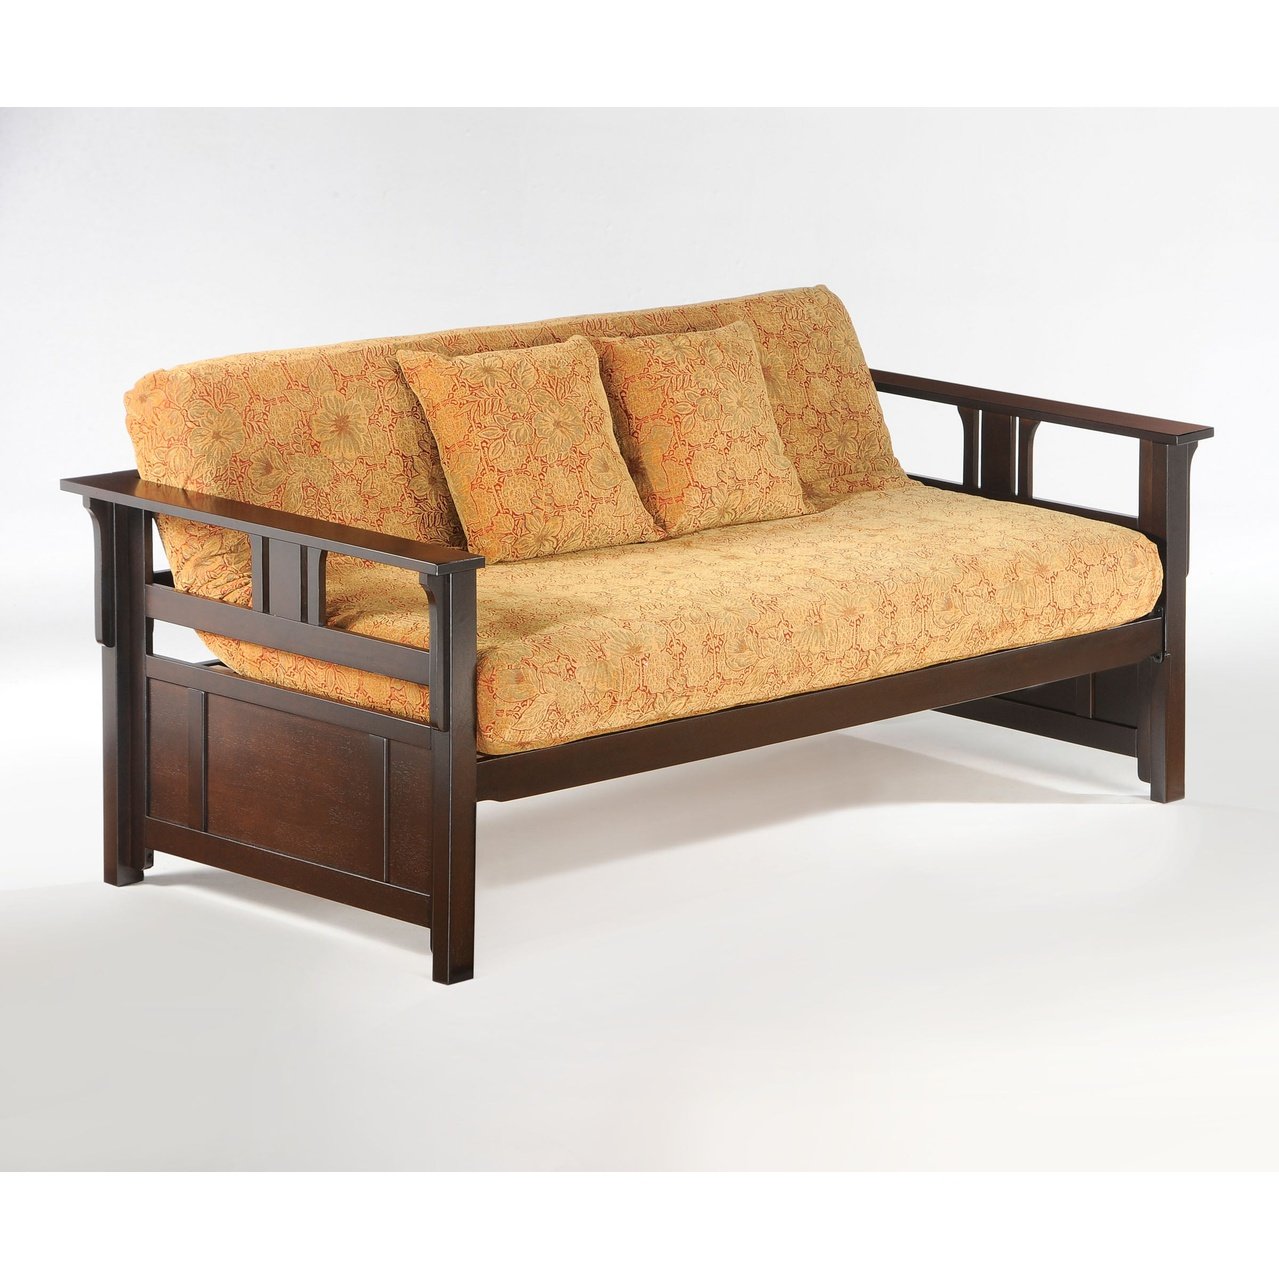 Night and Day Furniture Chocolate Teddy Roosevelt Daybed Complete